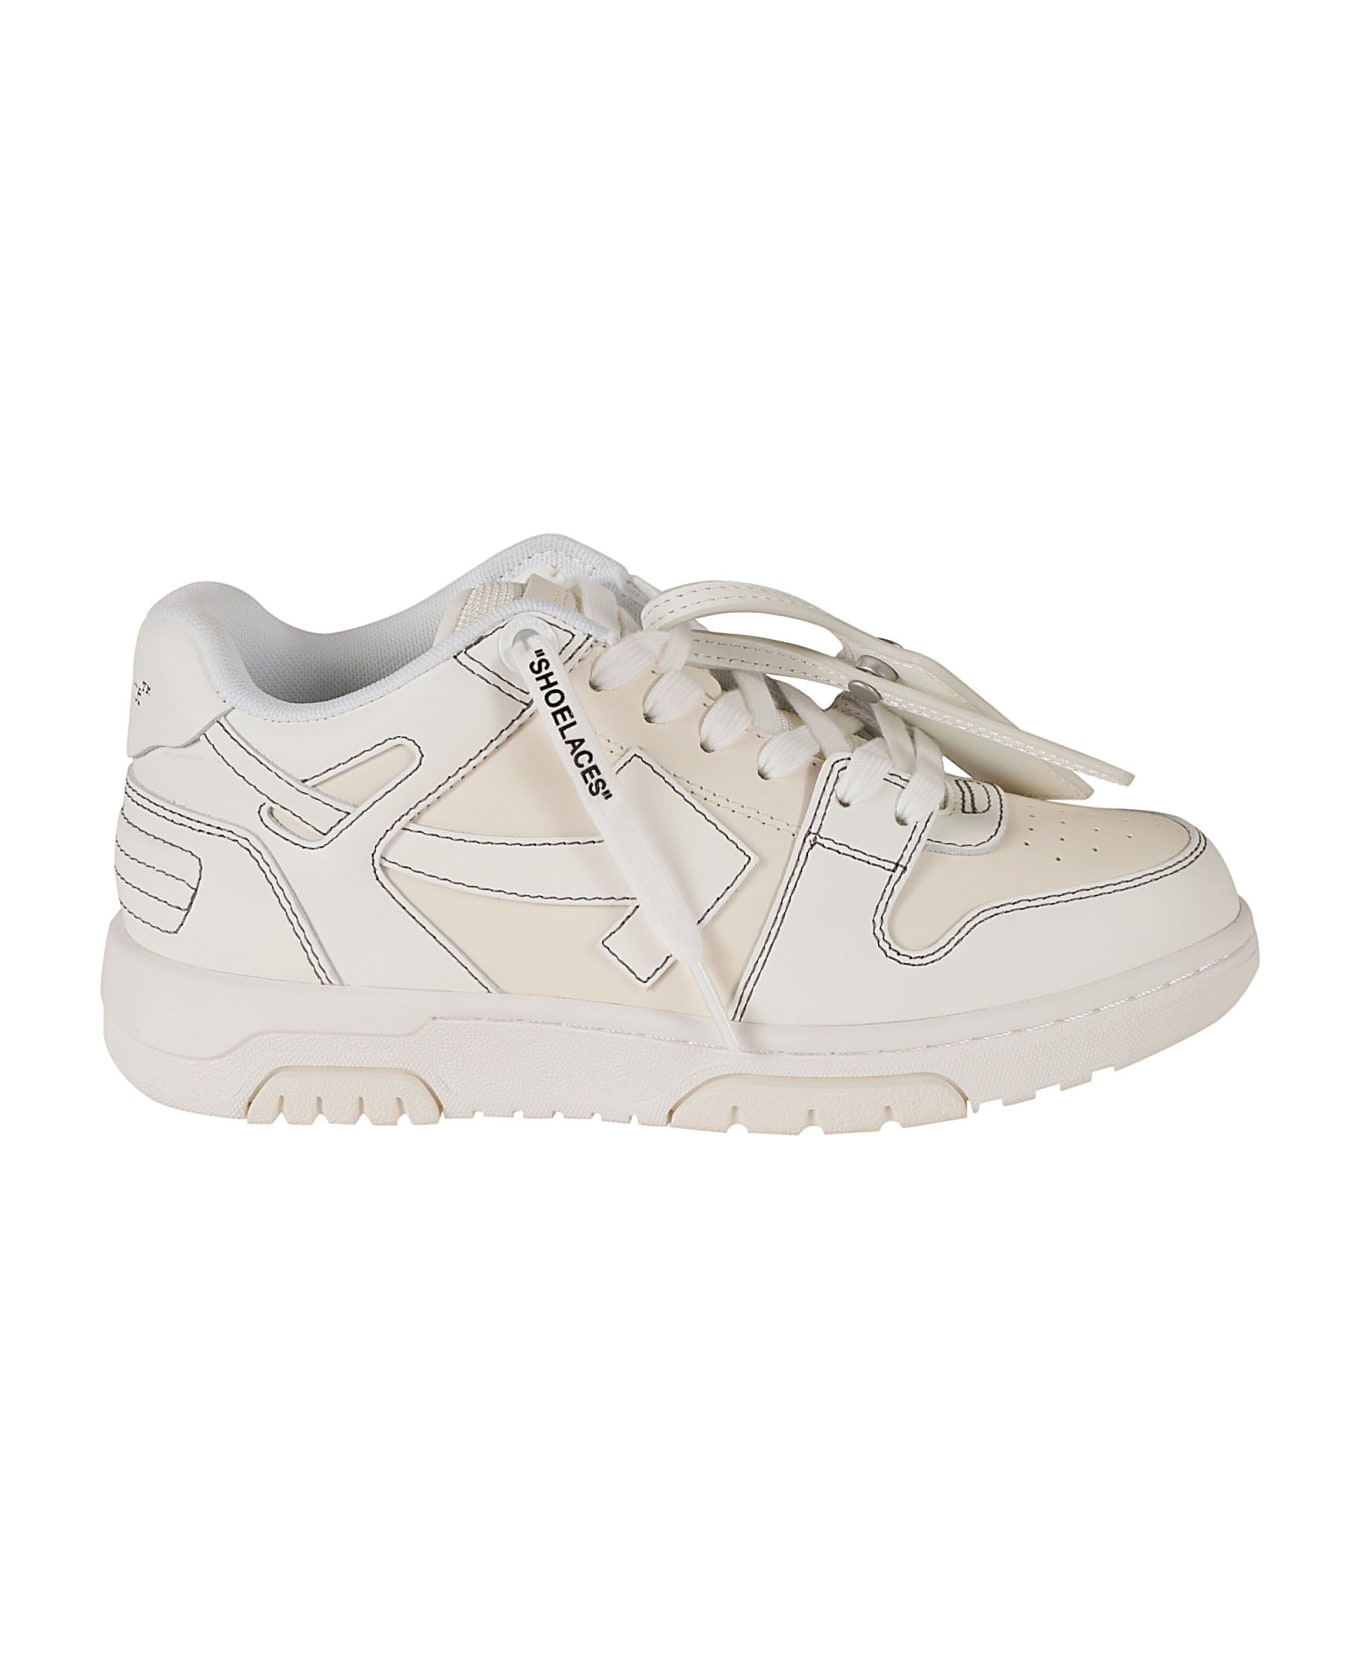 Off-White Out Of Office Sneakers - Cream/White